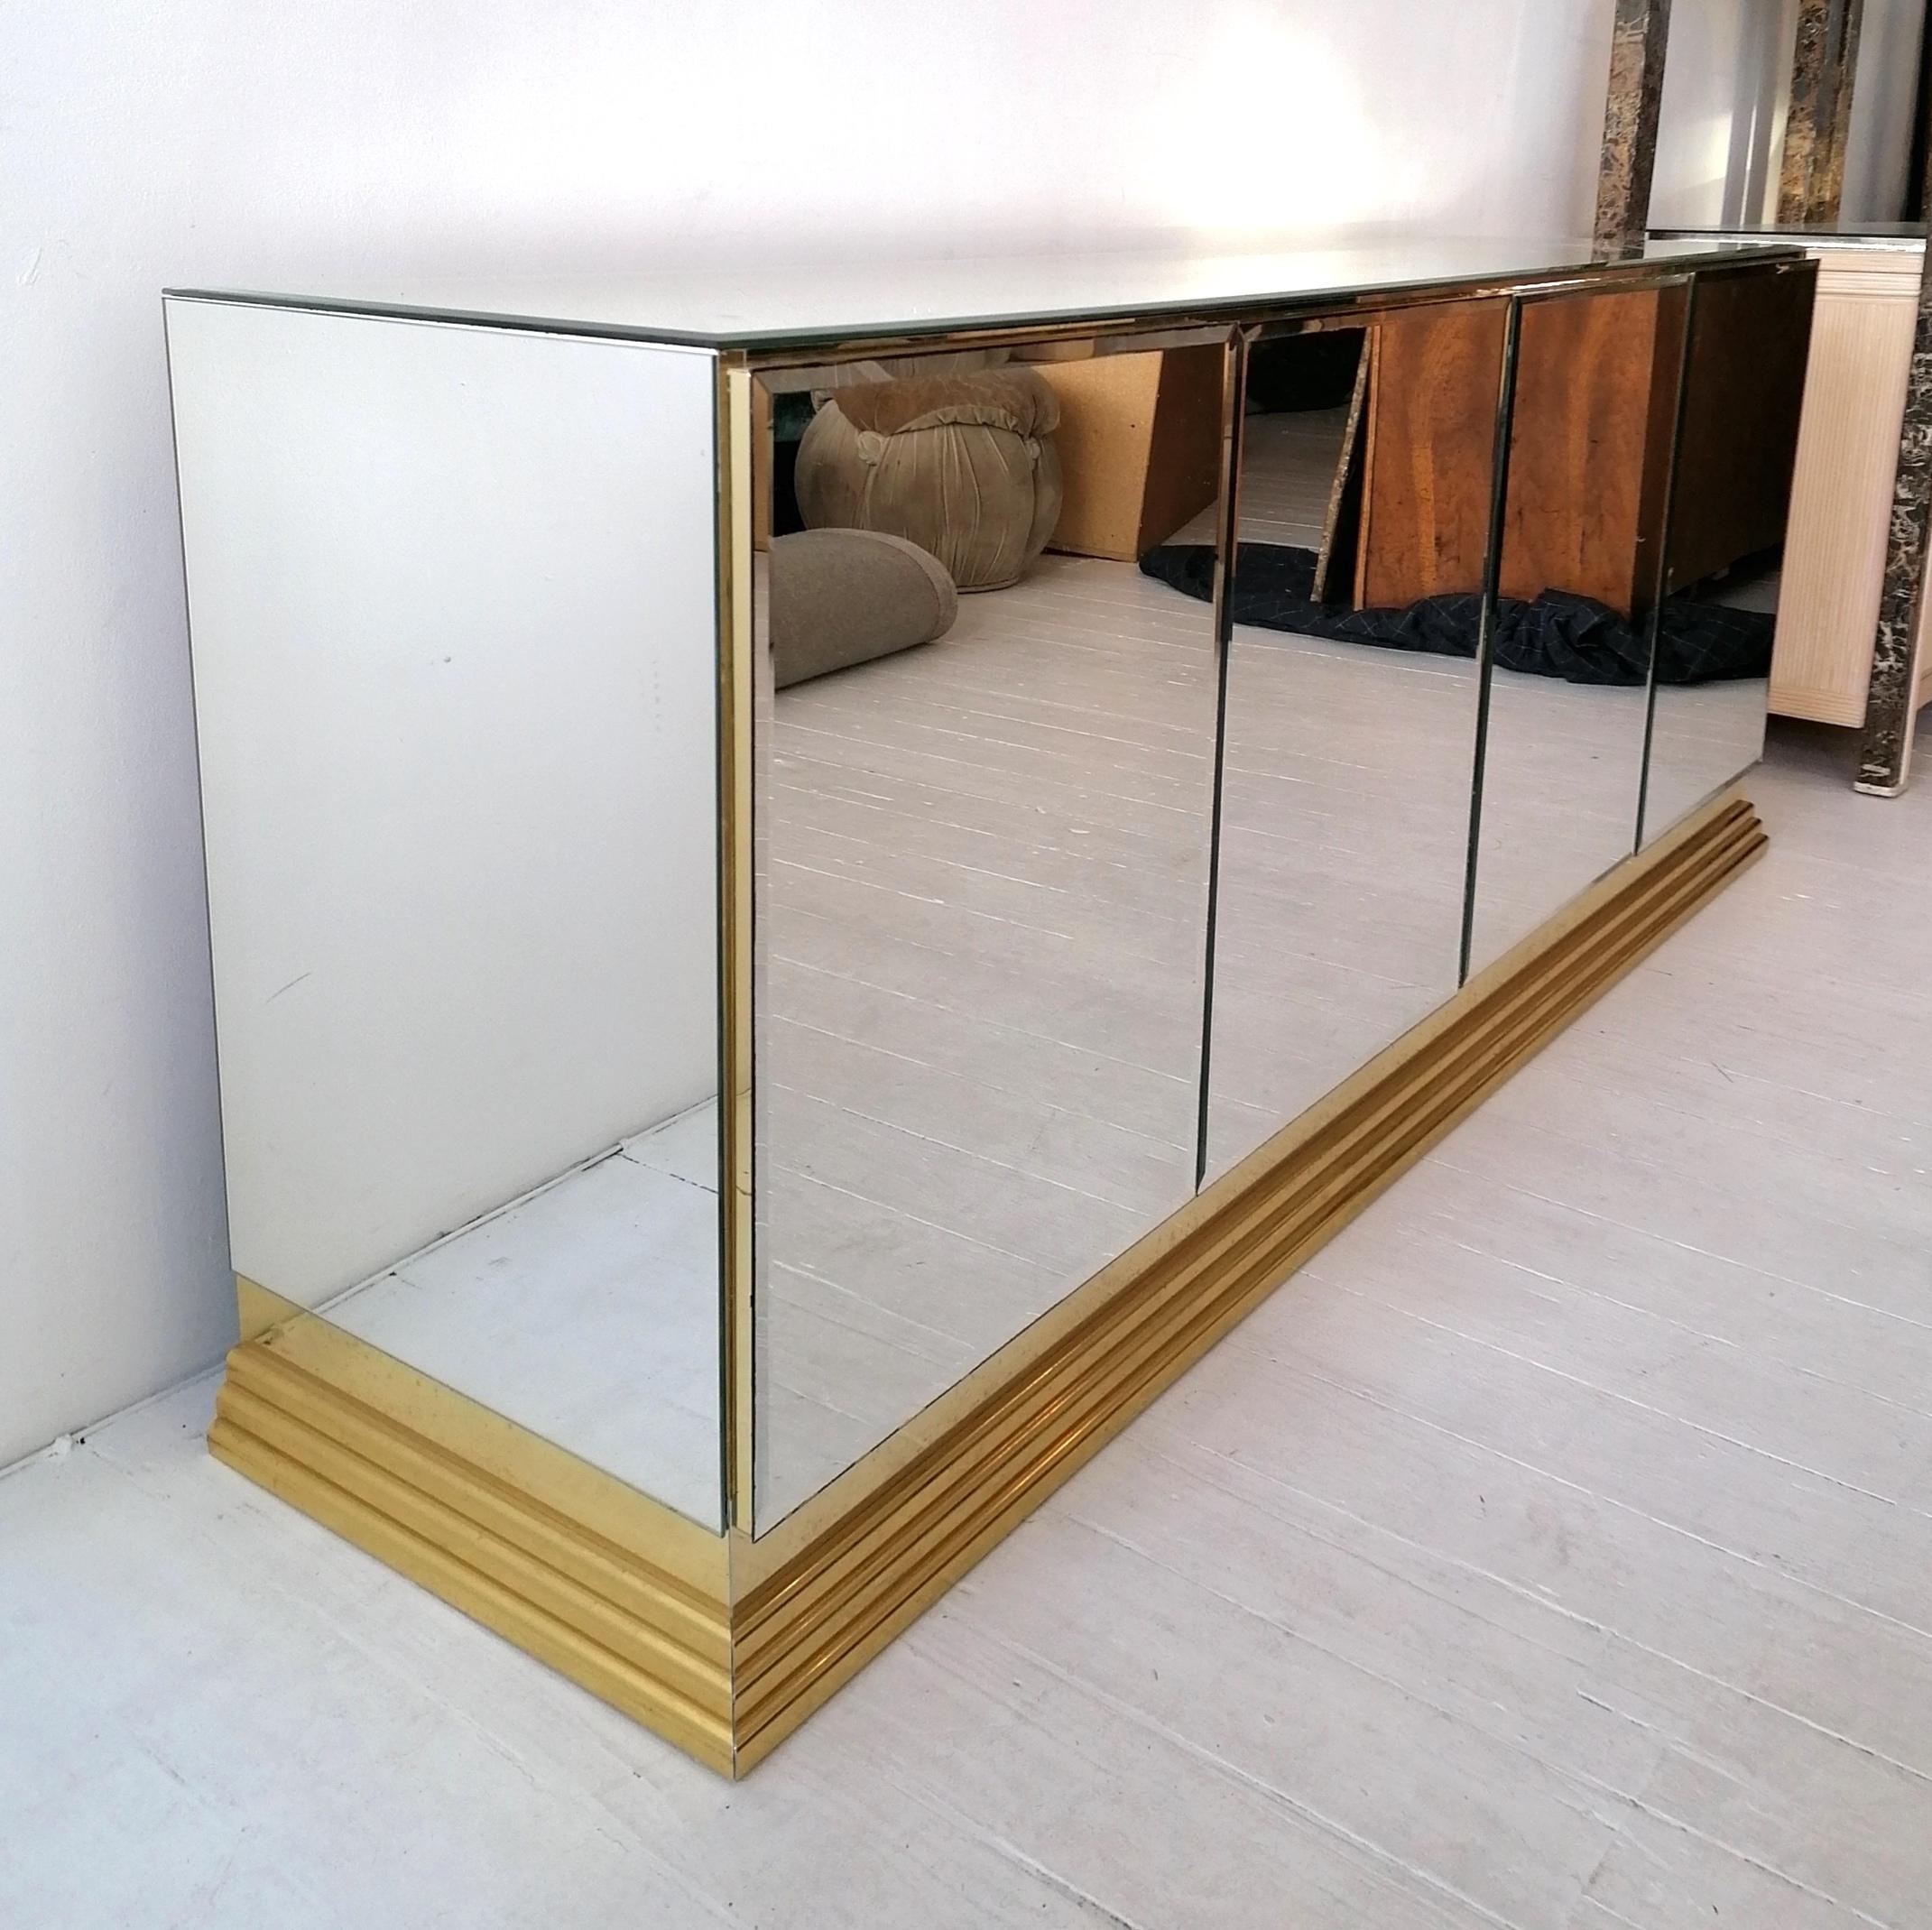 American Vintage Mirrored Sideboard with Brass Base, by Ello Furniture USA, 1970s / 80s